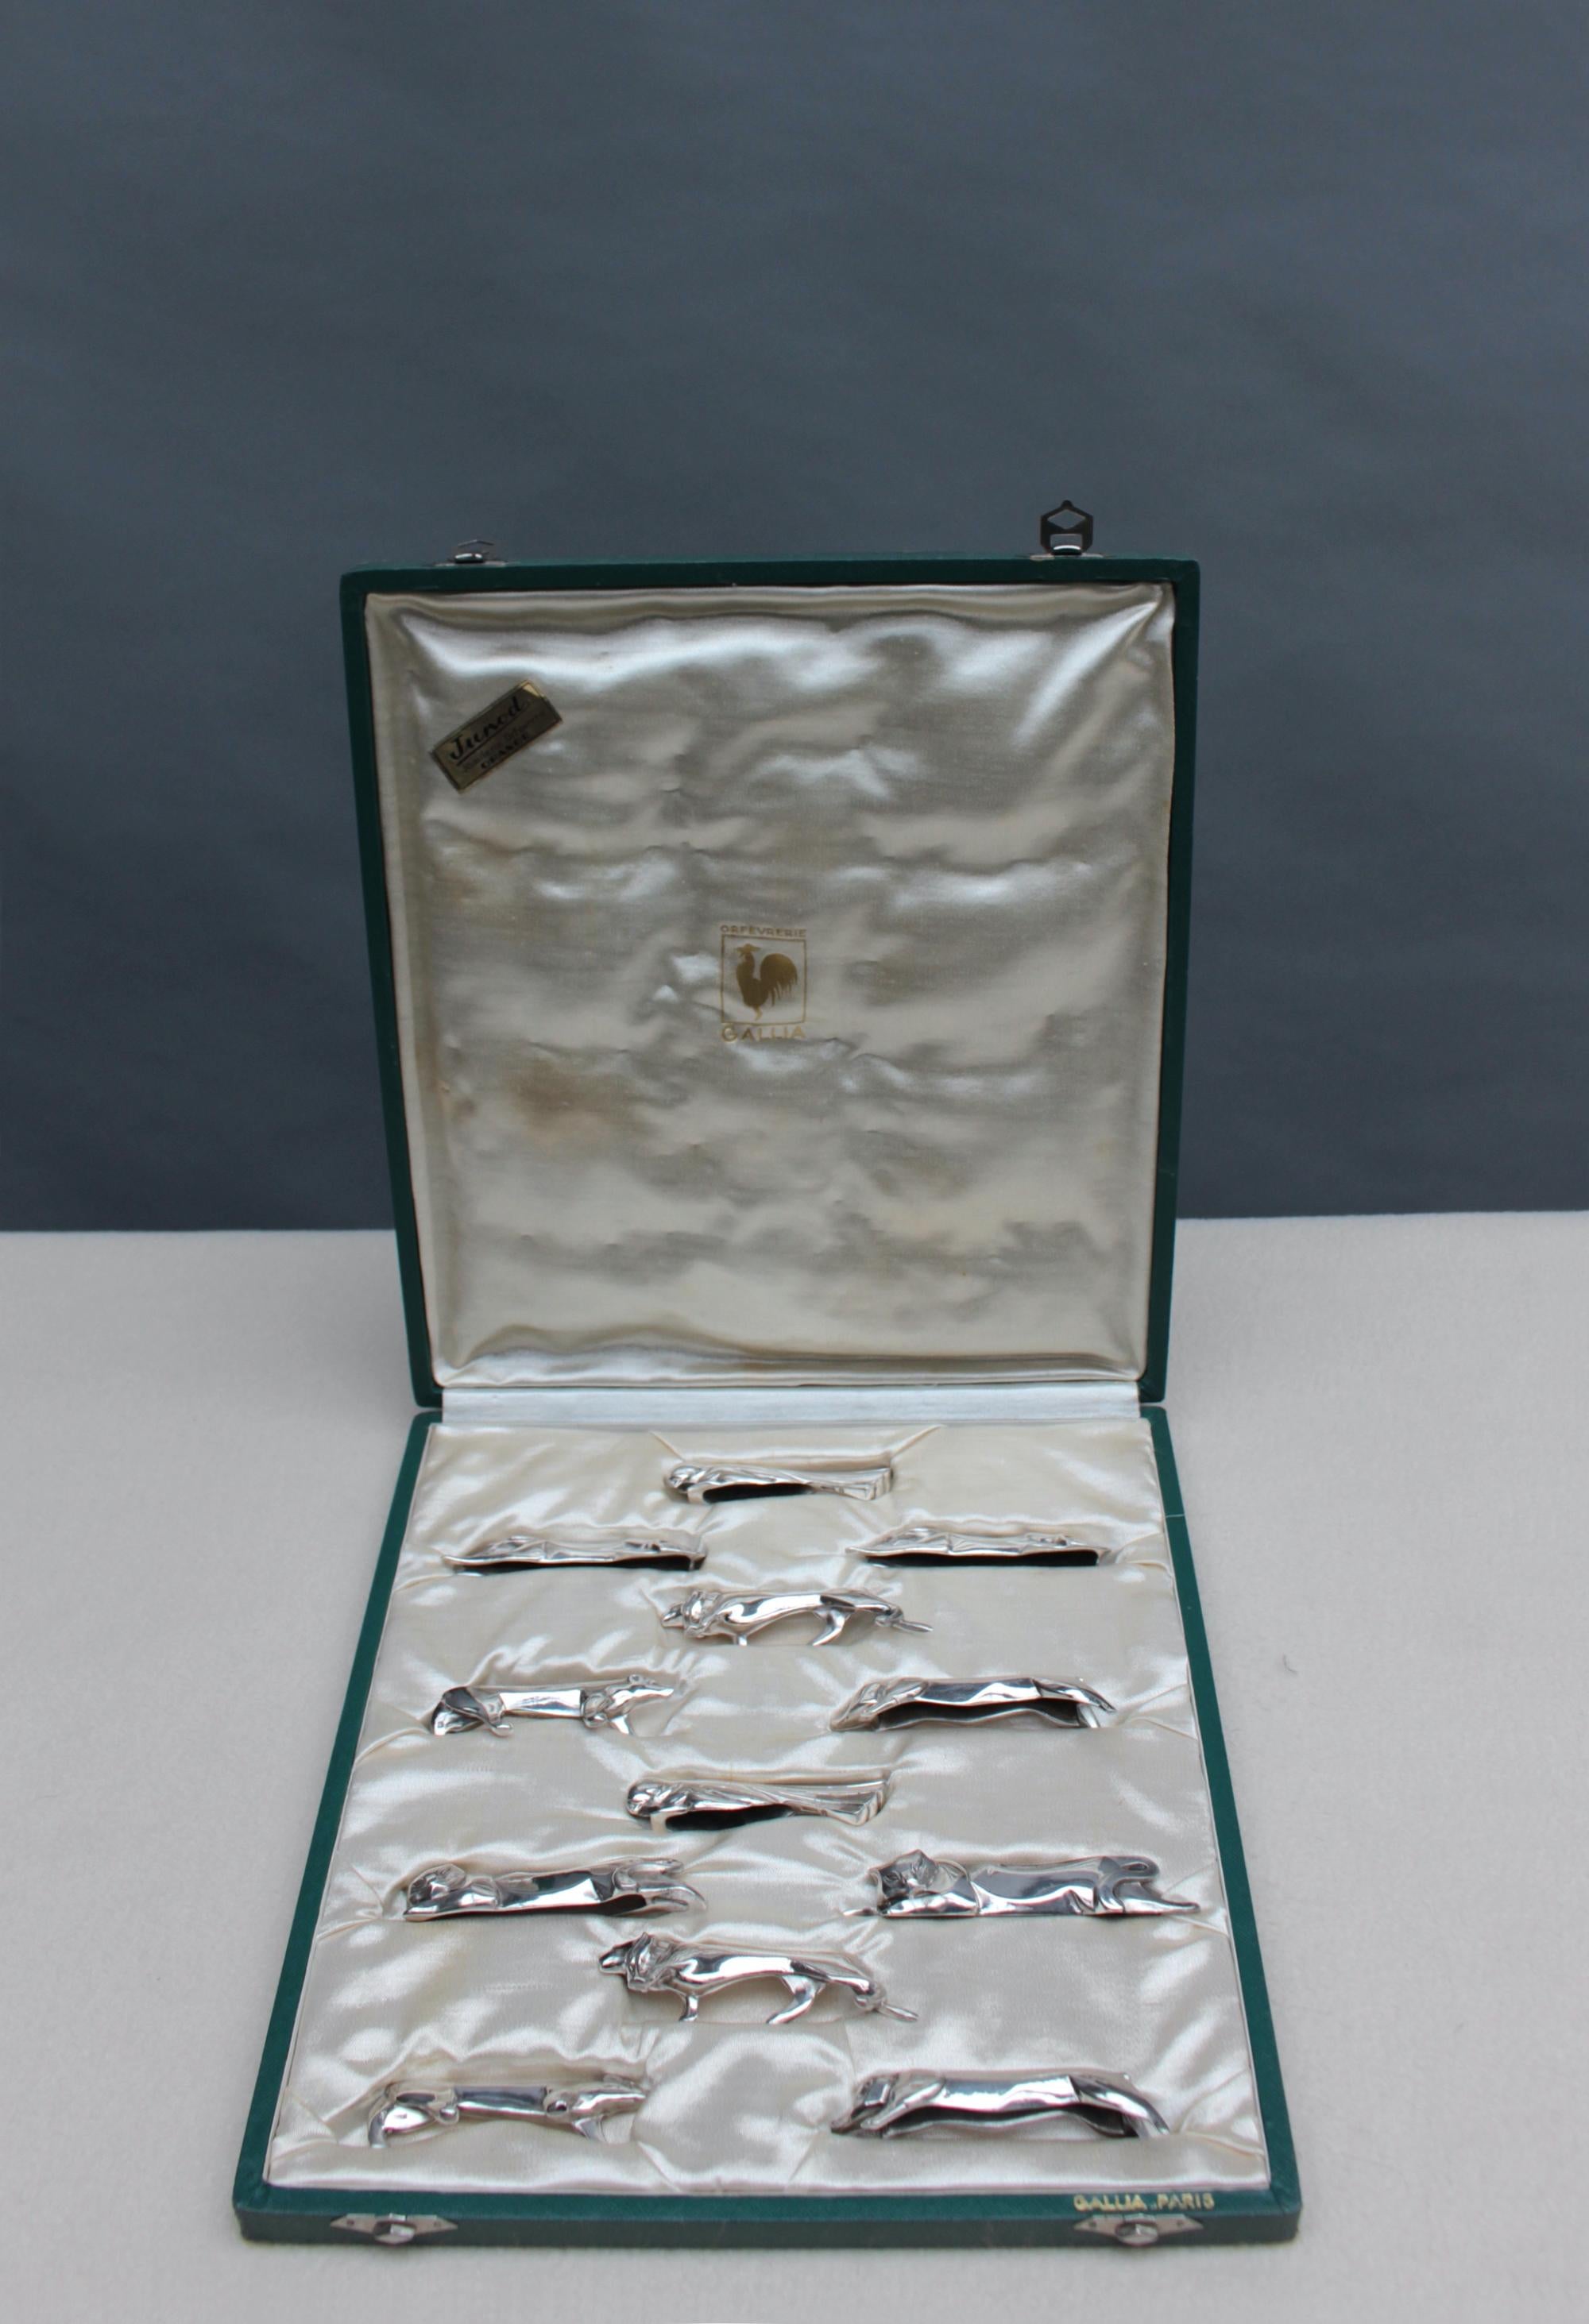 Set of 12 fine French Art Deco silver plated knife rests designed by Marcel Sandoz for the Gallia collection of Christofle. Six different animals are reproduced twice. 
Original case.

Average size of knife rests:
H 0.8 inch x L 4.3 inch x W 0.8